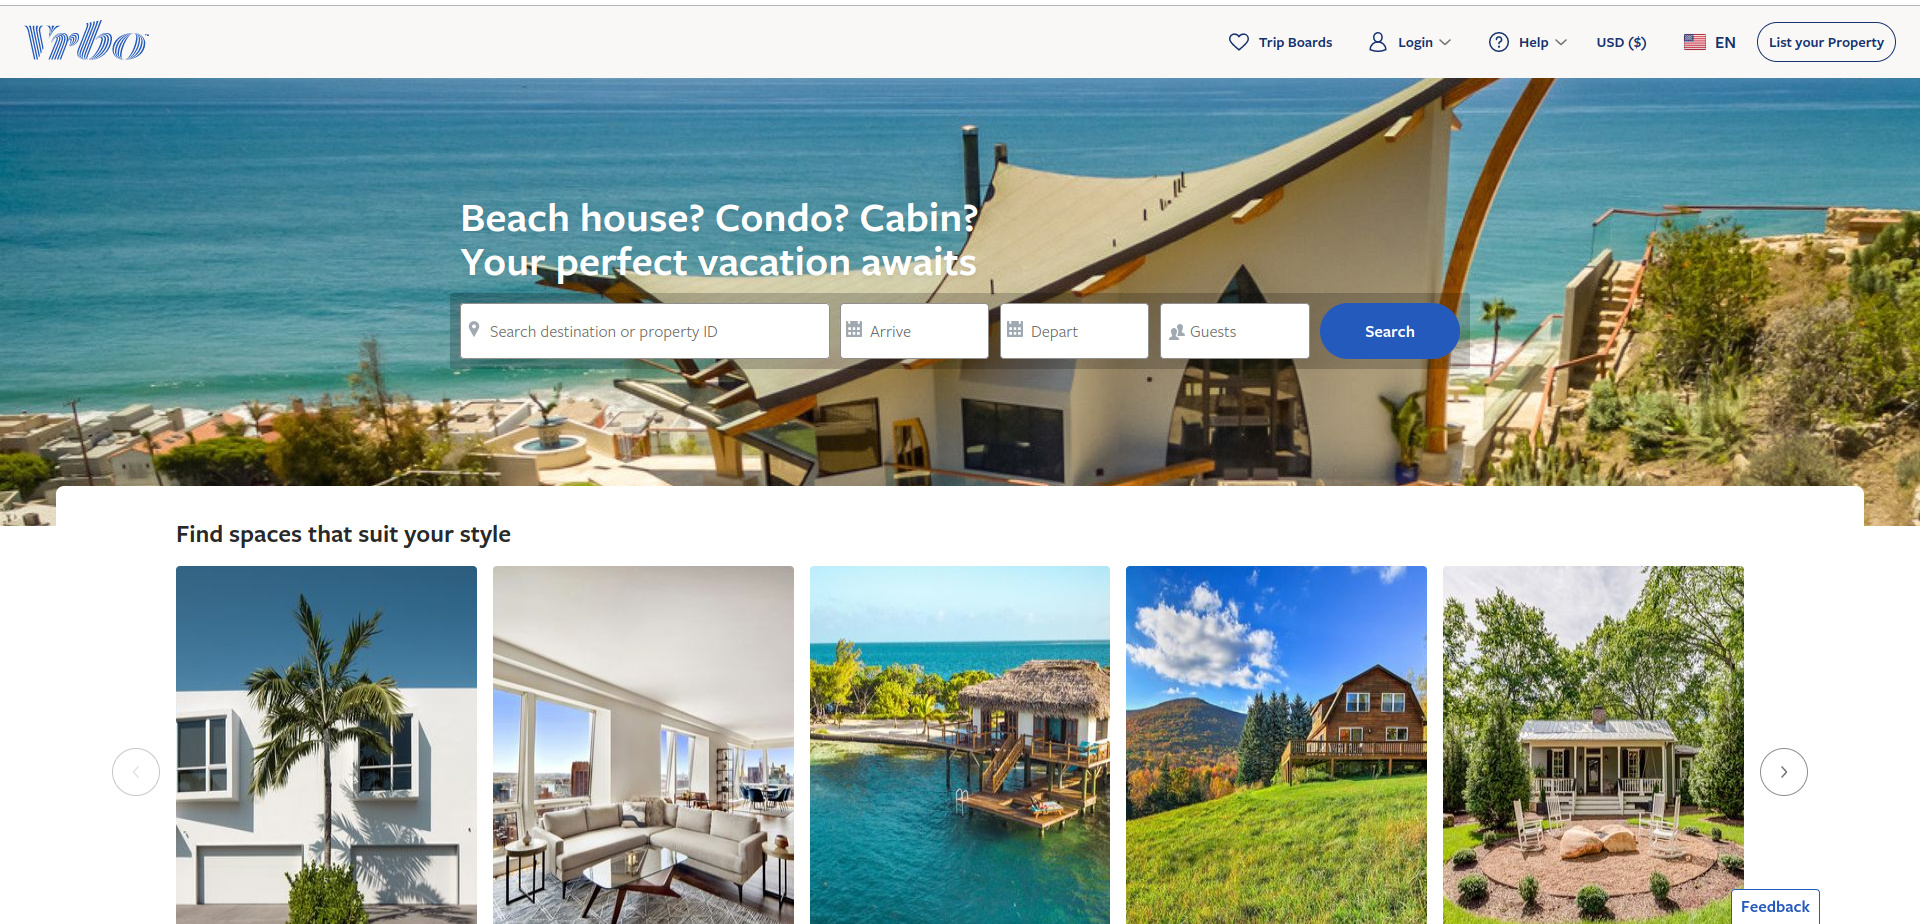 Screenshot of the Vrbo homepage - an airbnb competitor